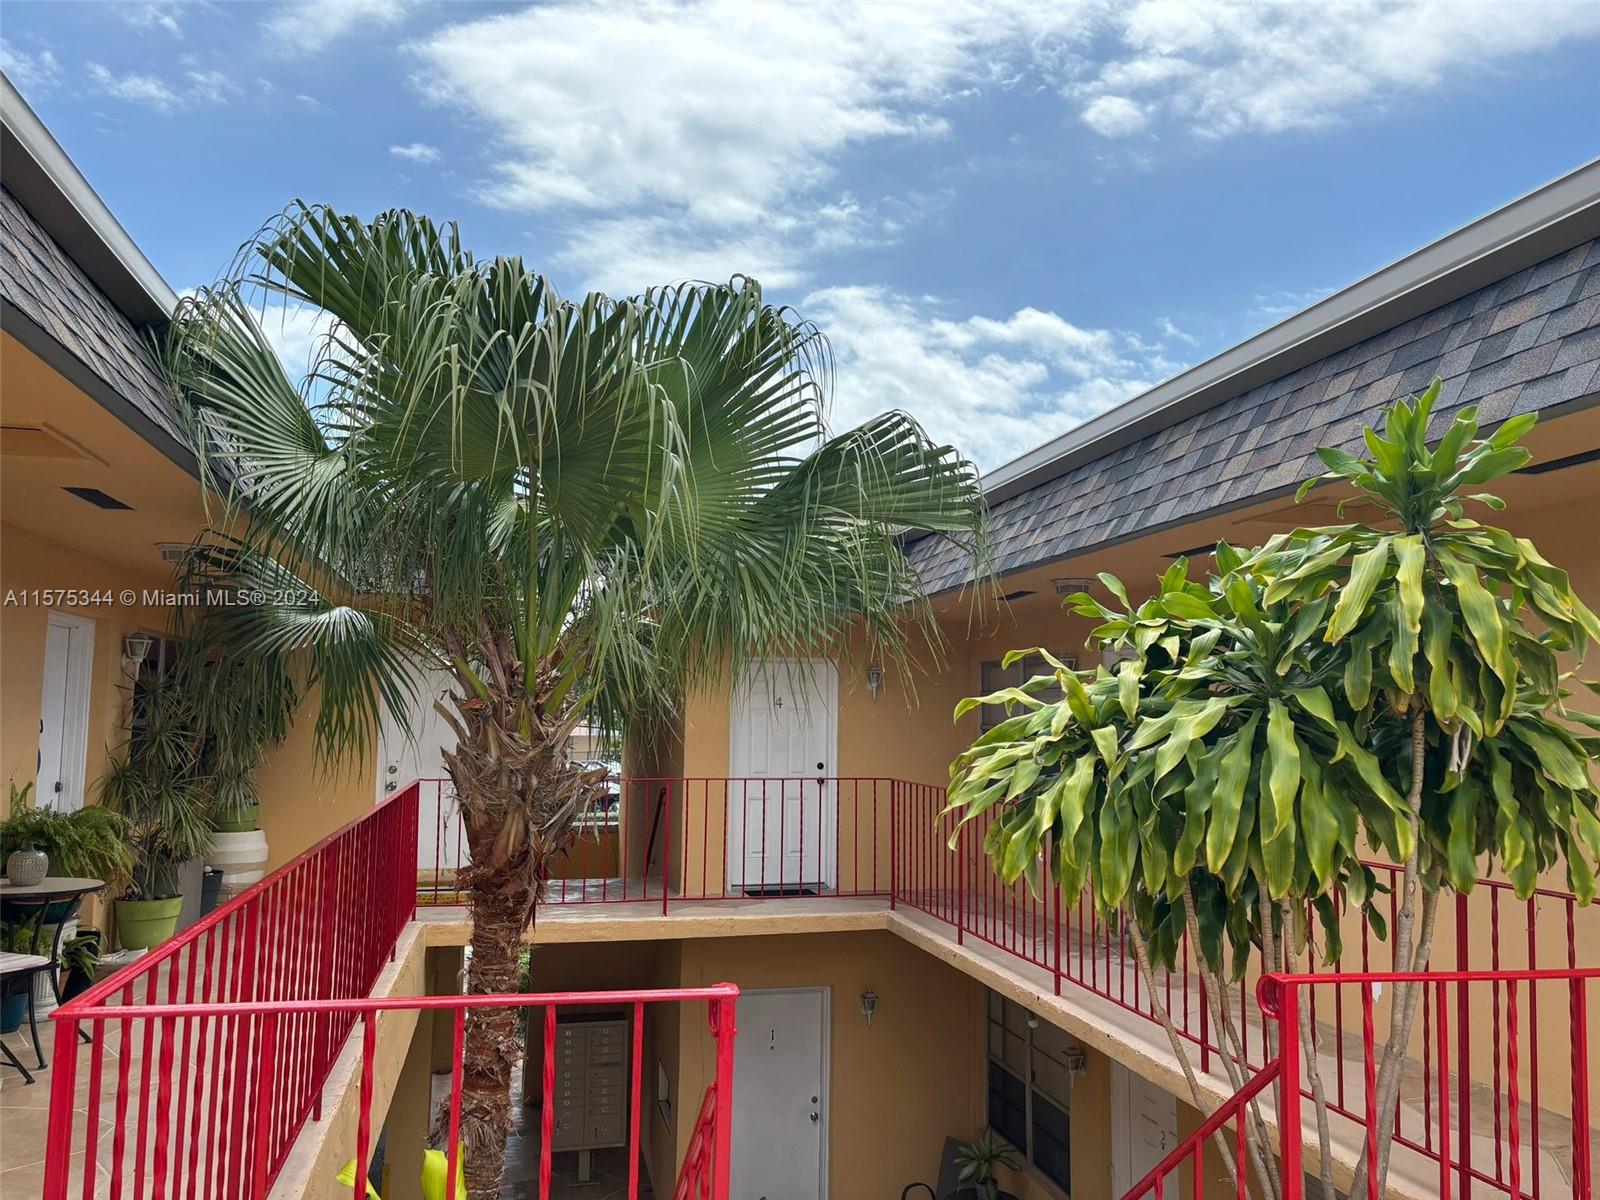 a view of a palm plant that is in front of house